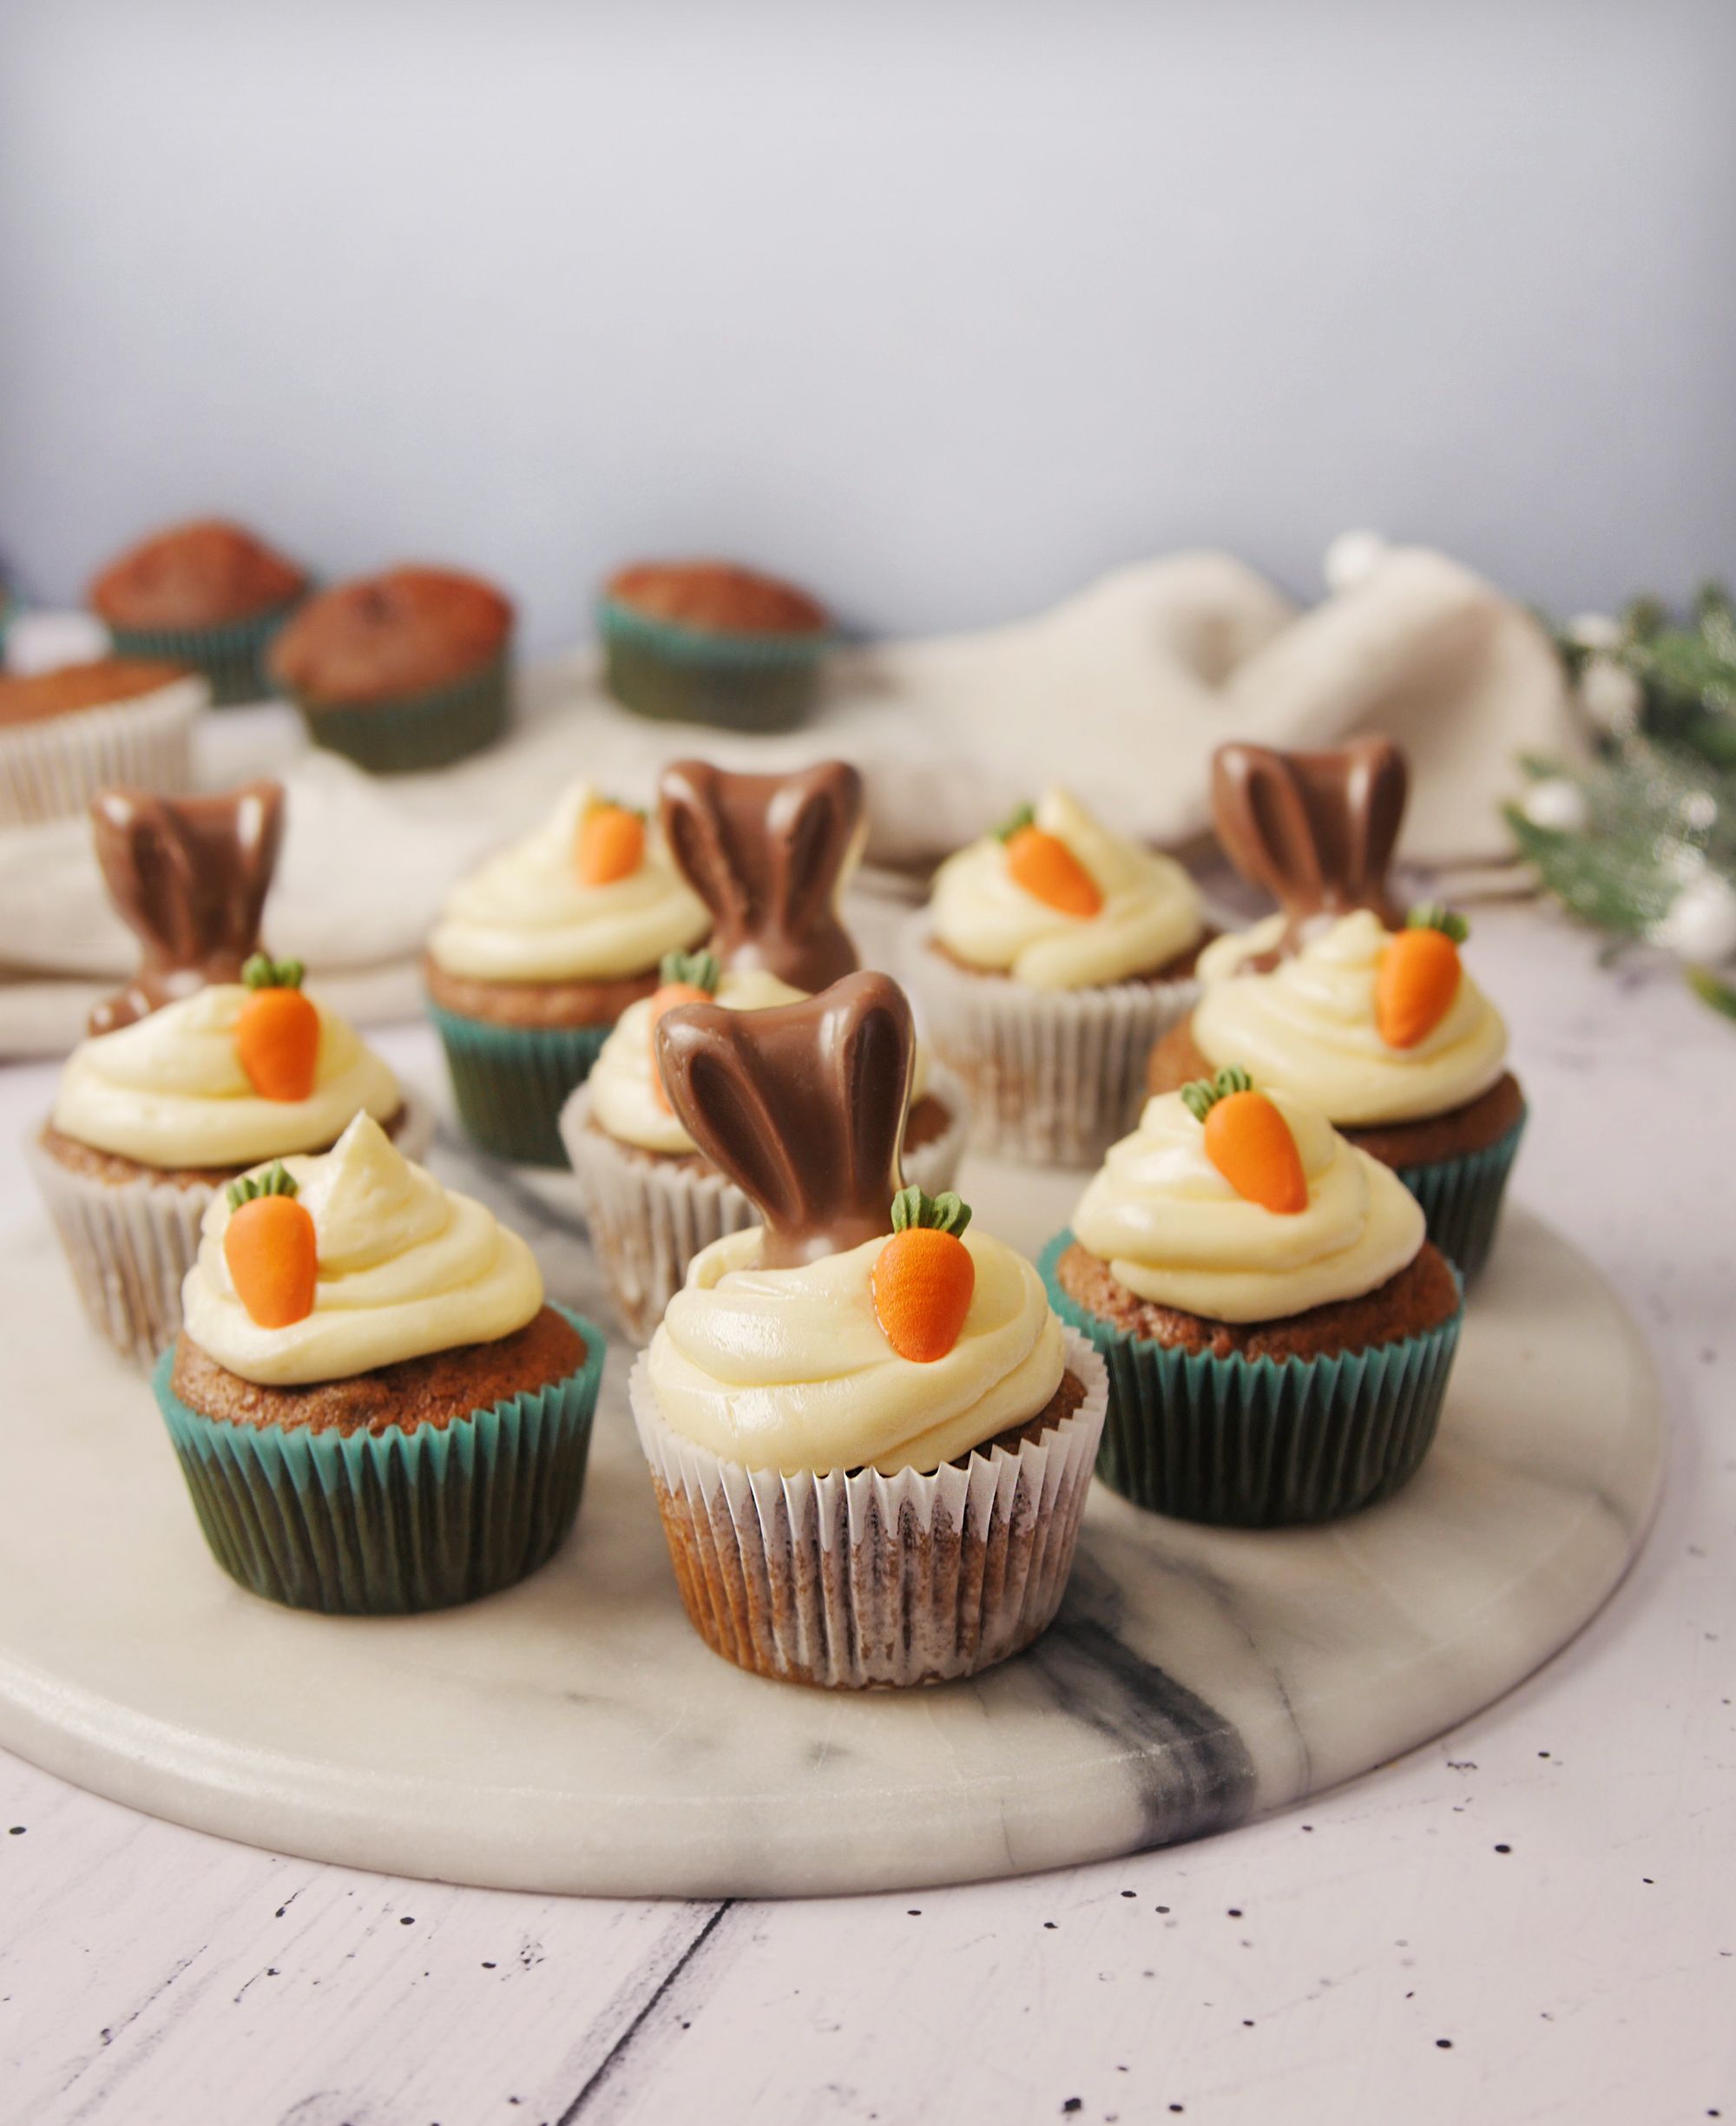 Carrot Cake Cupcakes with Cream Cheese Frosting | Queenslee Appétit